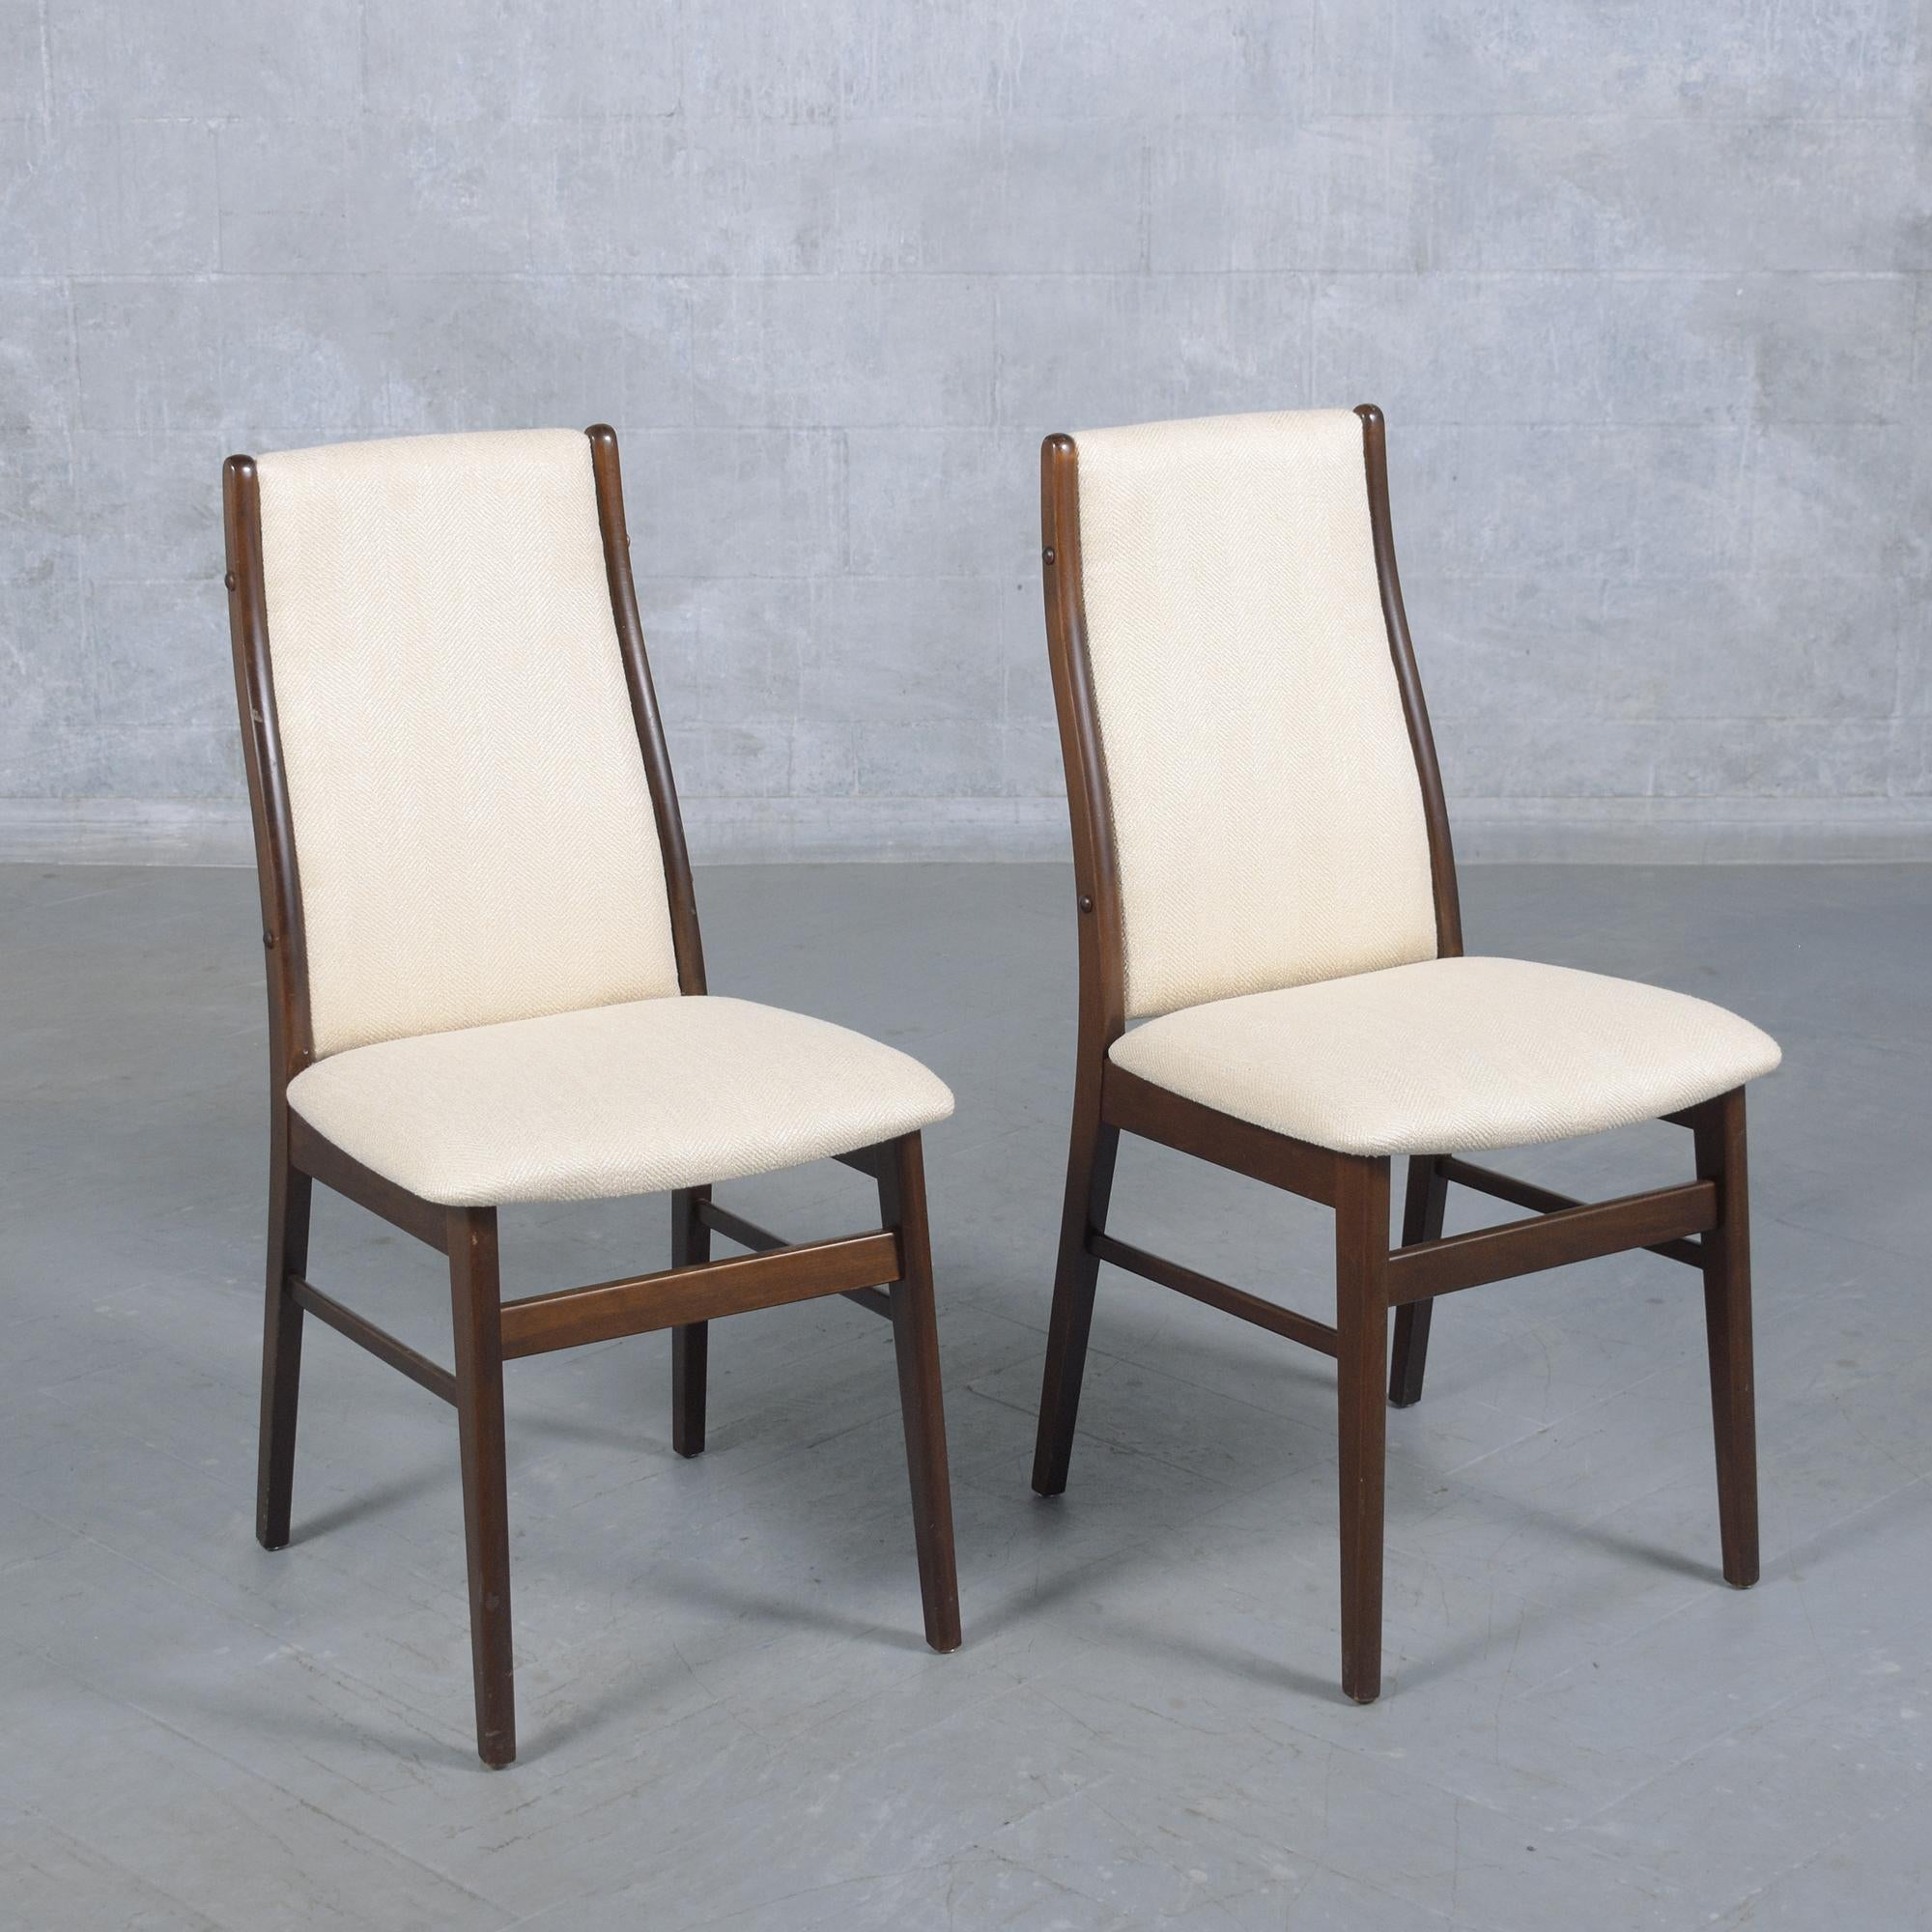 Exquisite Danish Teak Dining Chairs, Restored and Refined For Sale 1